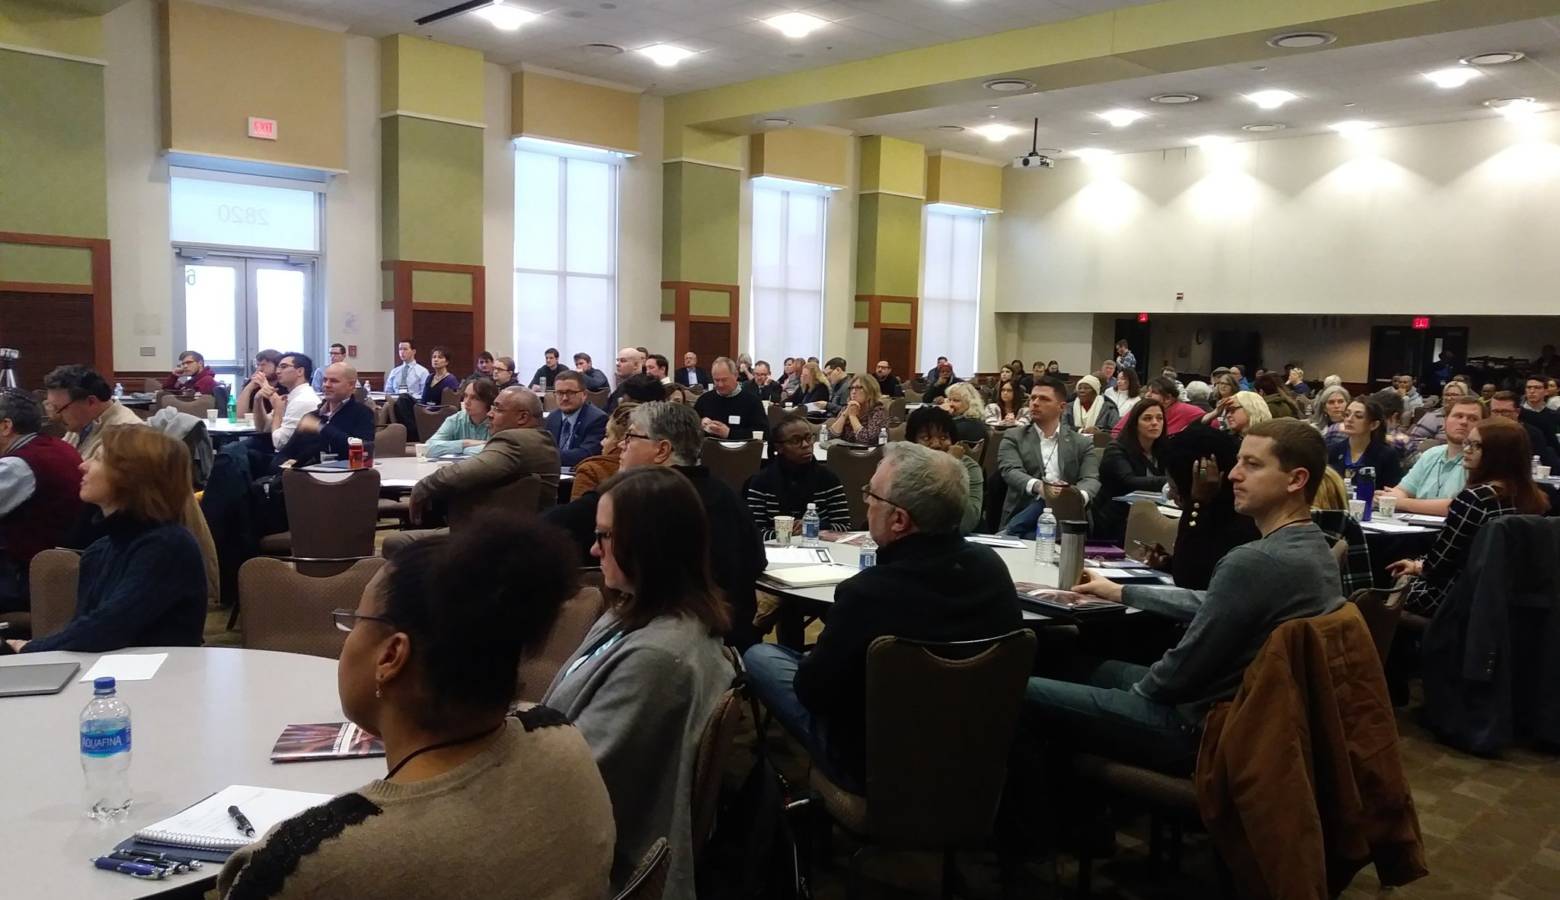 Prospective Democratic candidates for municipal races across the state gathered in Indianapolis Saturday for candidate bootcamp. (Lauren Chapman/IPB News)